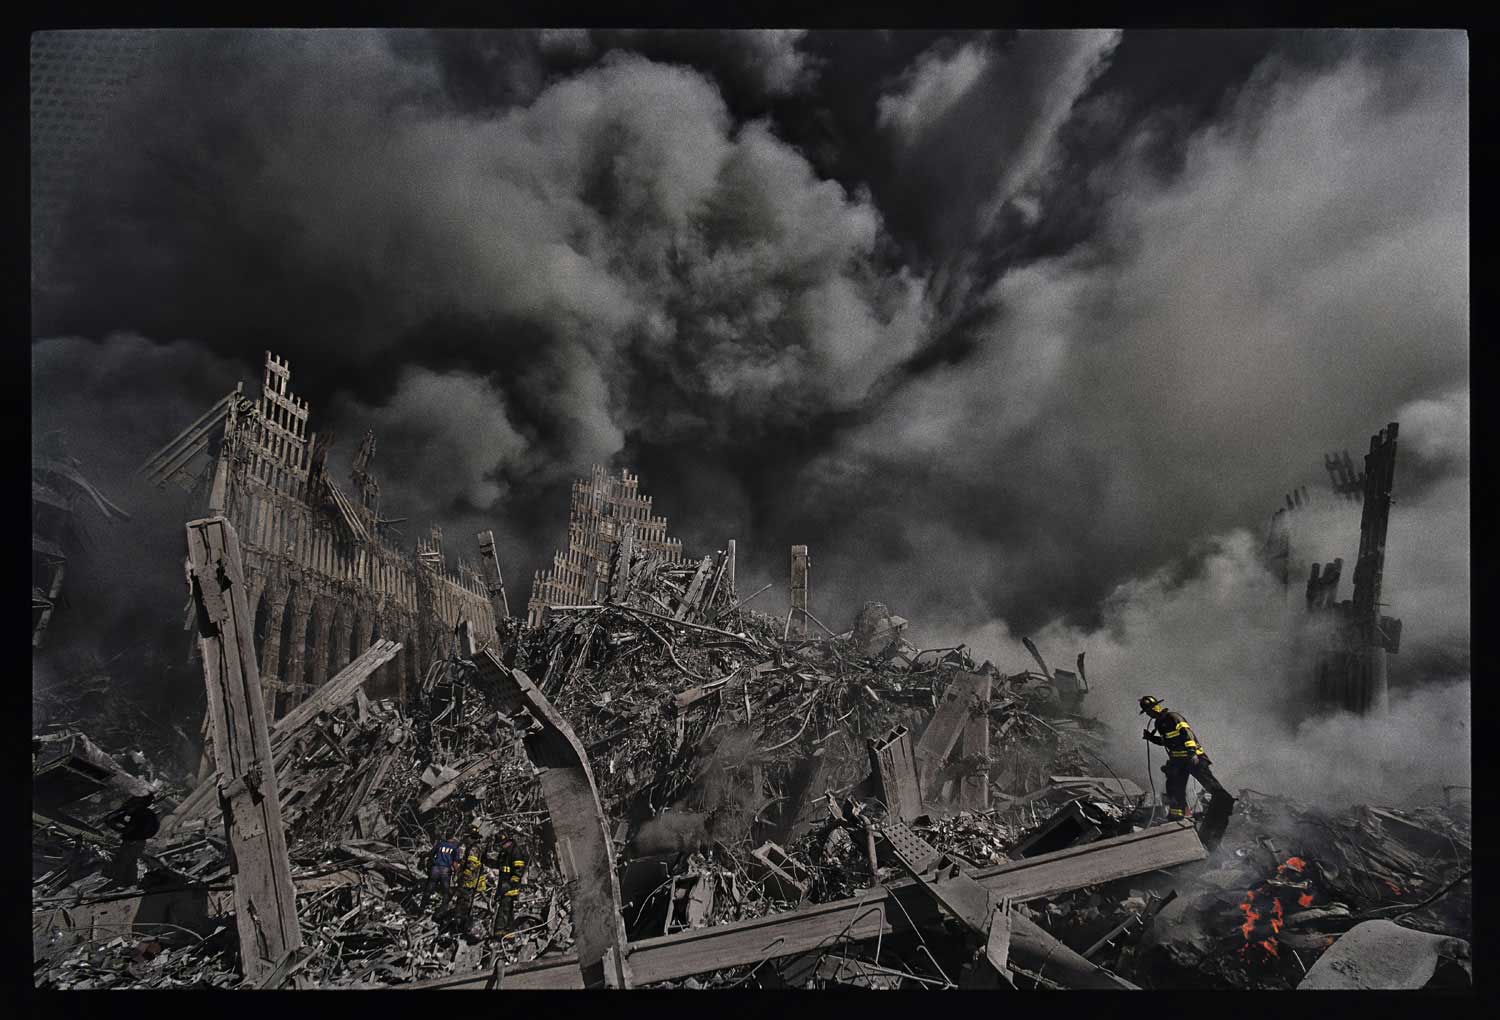 MaryAnne Golon, photo editor and media consultant; former Director of Photography of TIME
                              
                               James Nachtwey's photograph here of one tiny New York City fireman making his way through the inferno that was once the World Trade Center towers is forever seared into my memory from the darkest day in American history, 9/11/2001. Later on that evening, Jim, completely covered in ash from the fallen World Trade Center towers, arrived in person at the Time and Life building in midtown Manhattan to deliver his exposed film to his waiting editors. While his film was being processed, he drank a large bottle of water, and slumped exhausted in a dark green chair in the Time photo department hallway. The following morning, the imprint of his body on the chair and his dusty footprints were still there. Then editor-in-chief Norman Pearlstine and his deputy, John Huey, came by to see where the great photographer had walked.  James Kelly, the finest news magazine editor in America, chose to run many of Jim's pictures in the 9/11 black-bordered issue of TIME Magazine that memorialized that tragic event. I was honored to have been the picture editor of that edition and to be the first person in the world to have seen Jim's haunting work. It took months for me to grieve as a human being. I was working 80-hour weeks to do my job as a journalist. Jim's work comforted me and helped many Americans to process the hideous aftermath of those horrendous days. Thank you, Jim Nachtwey.